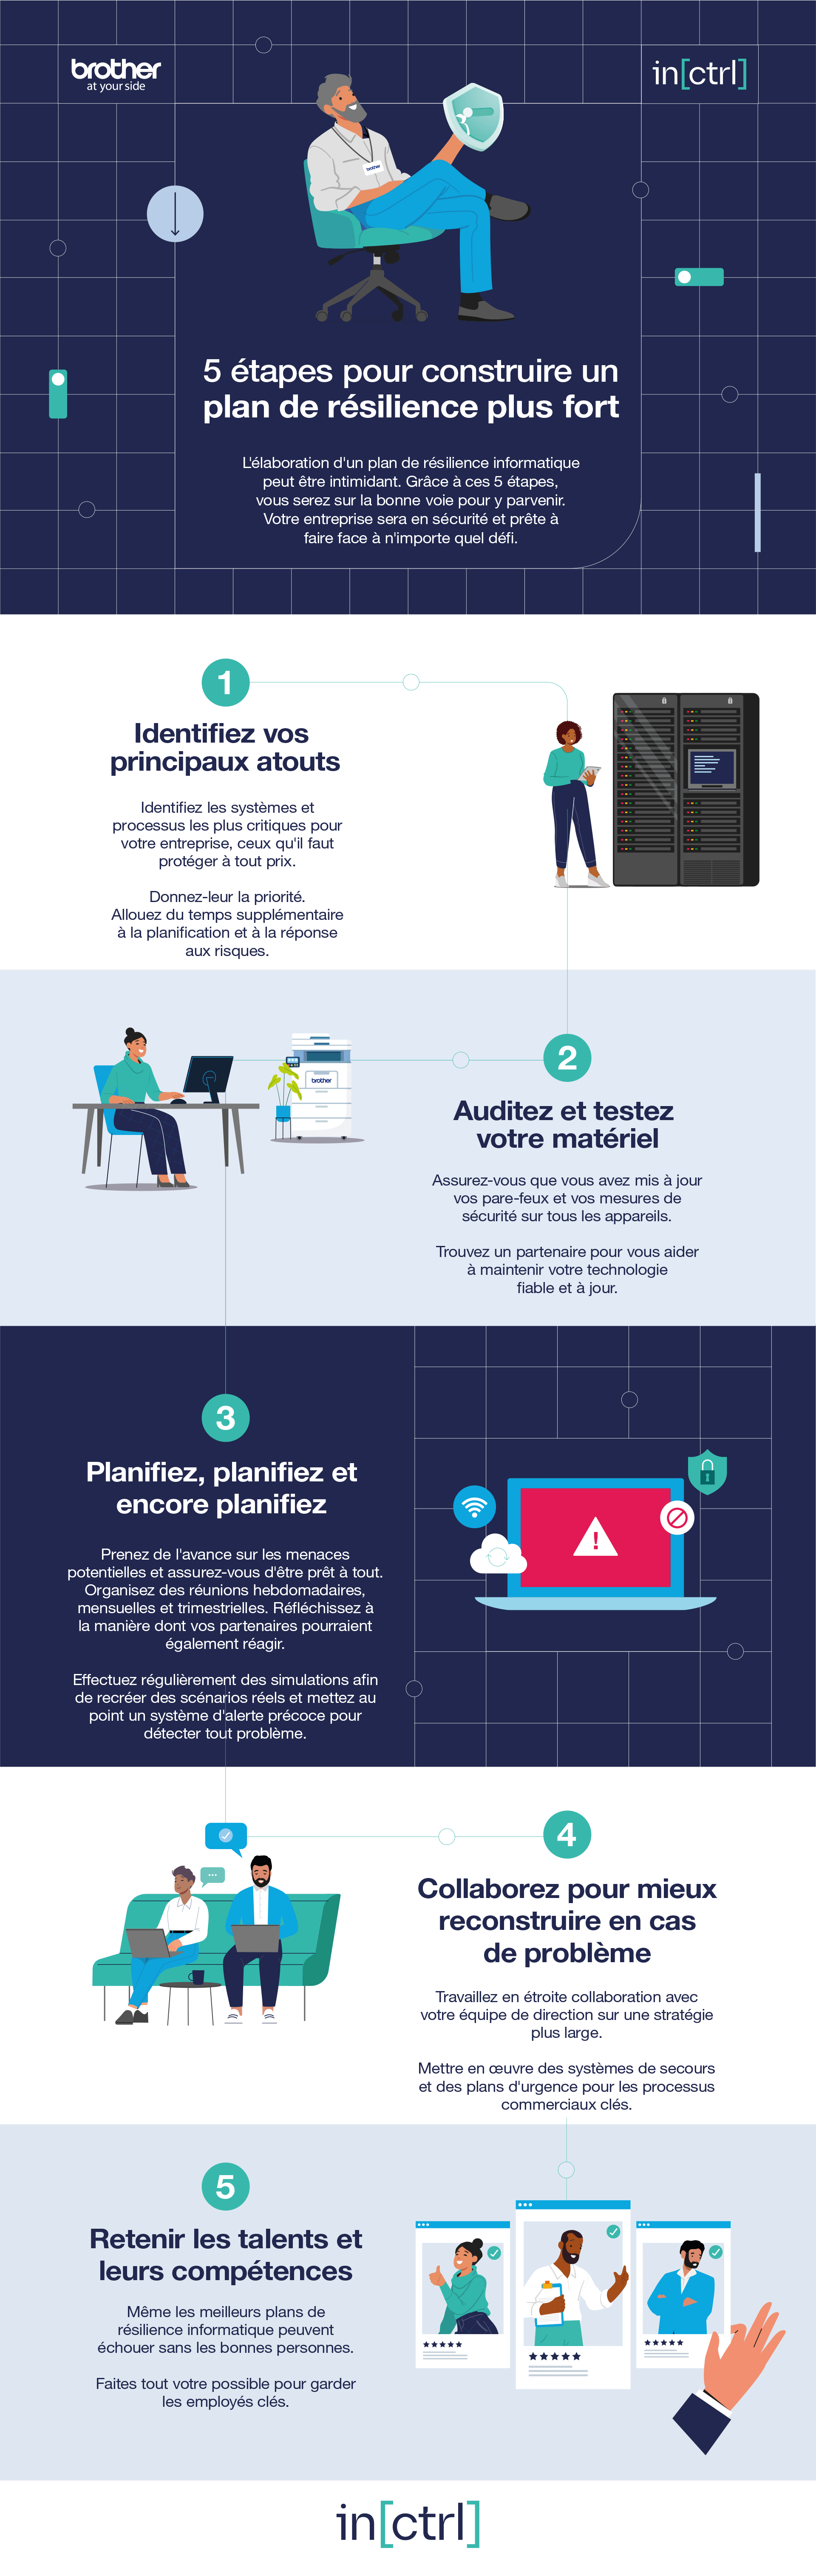 Infographic detailing Brothers 5 steps to IT resilience to help IT leaders secure their business from external threats